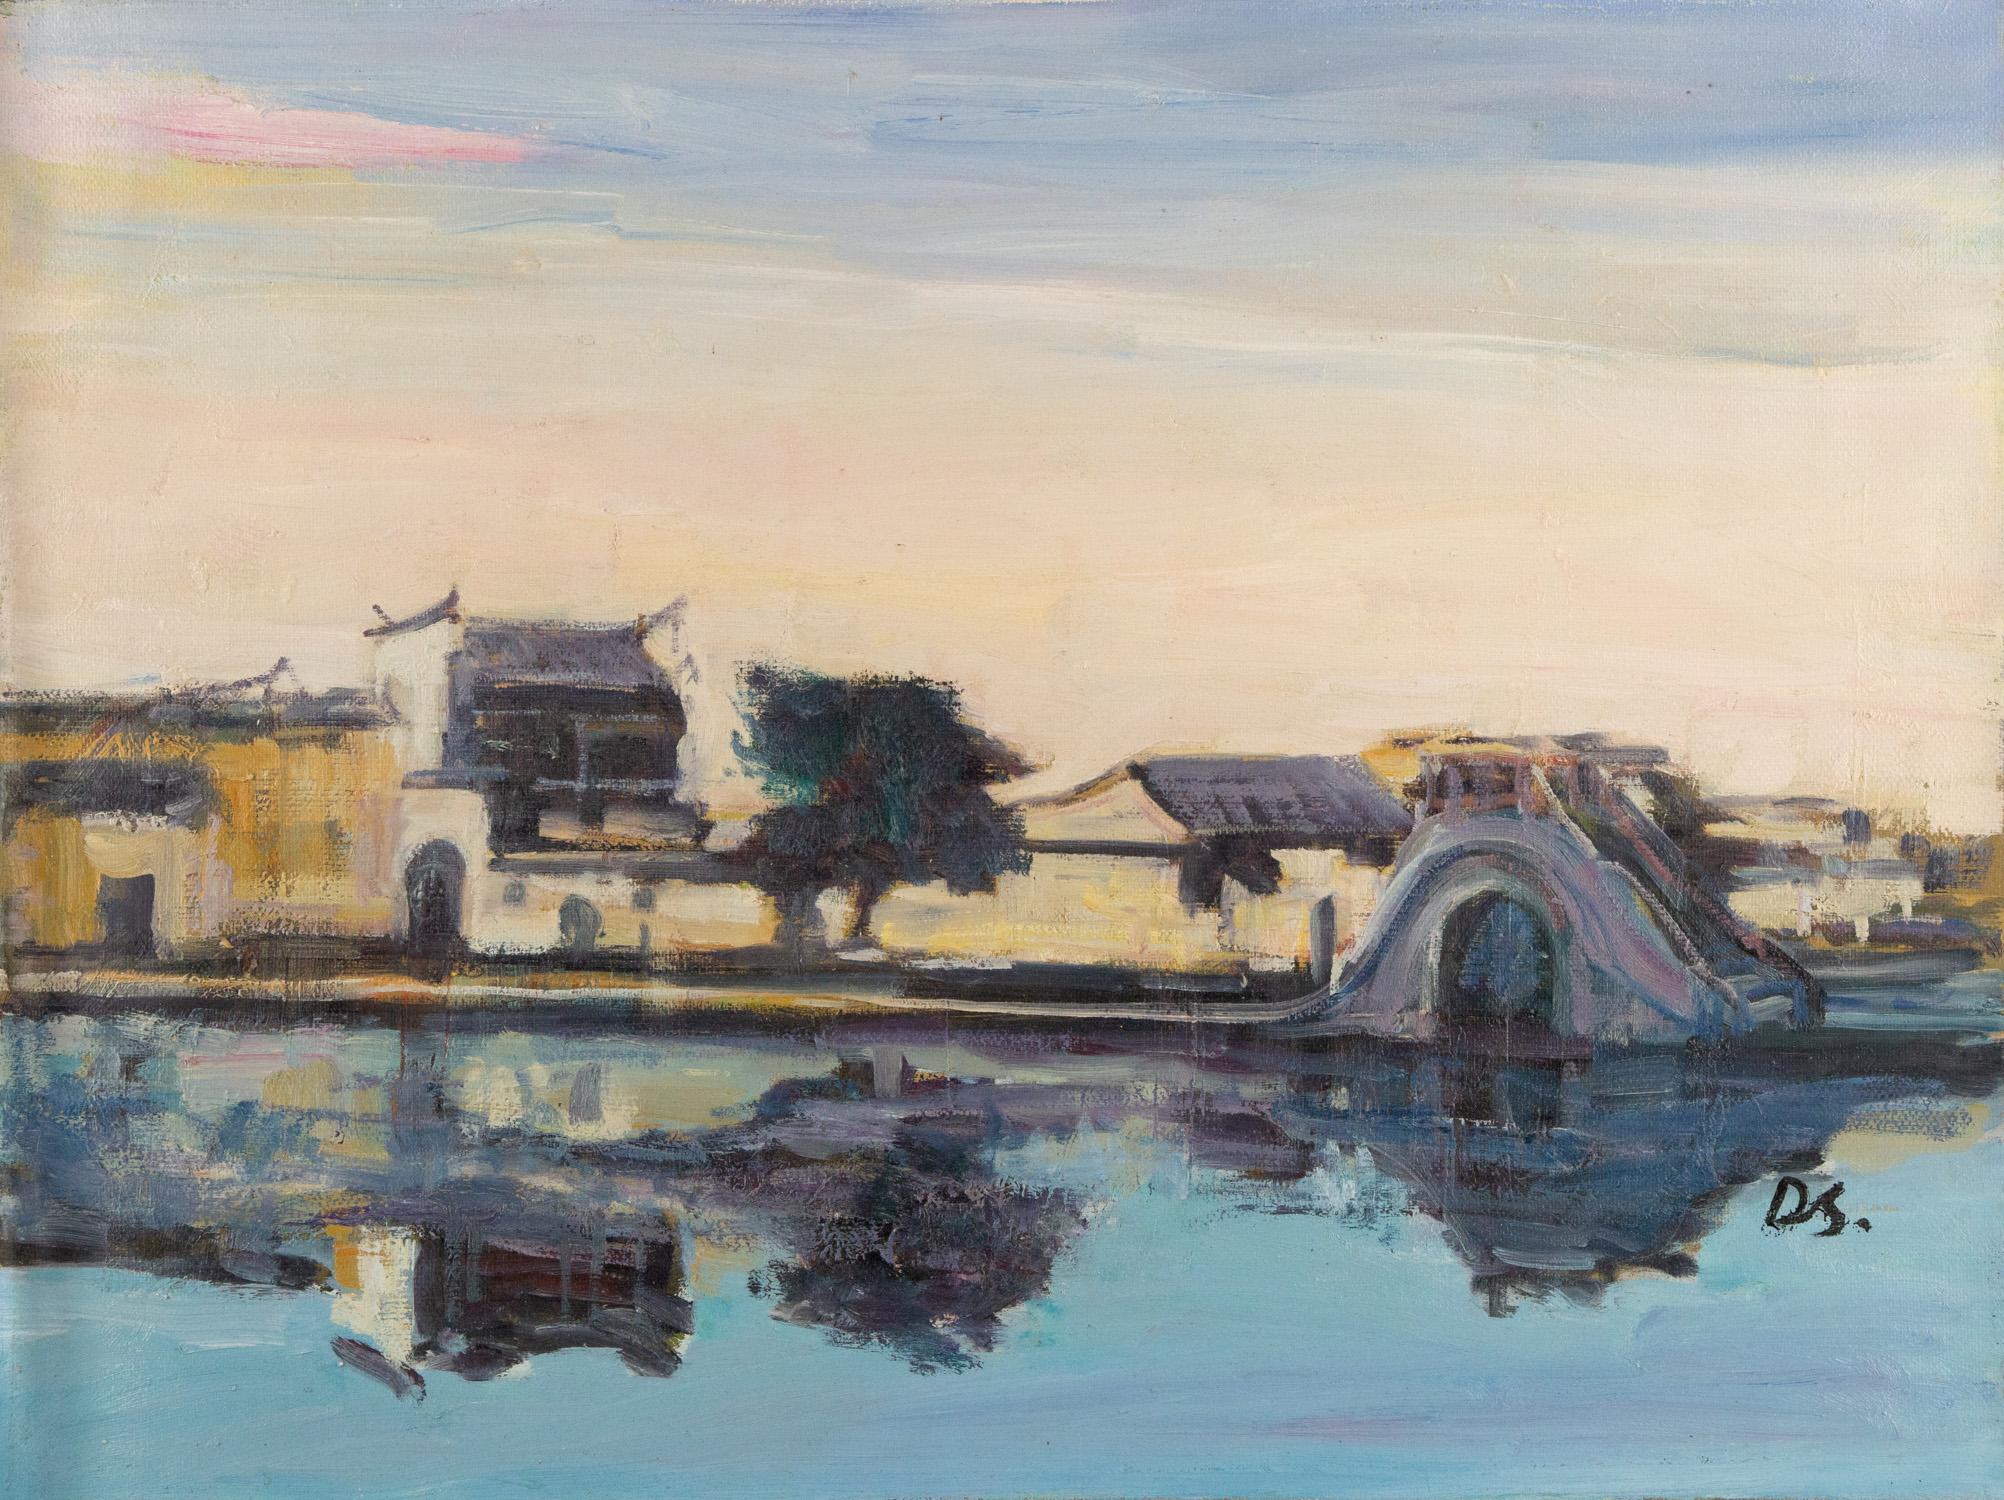 Title: Water Town Sunset
Medium: Oil on canvas
Size: 23 x 31 inches
Frame: Framing options available!
Condition: The painting appears to be in excellent condition.
Note: This painting is unstretched
Year: 2000 Circa
Artist: Dejun Wang
Signature: